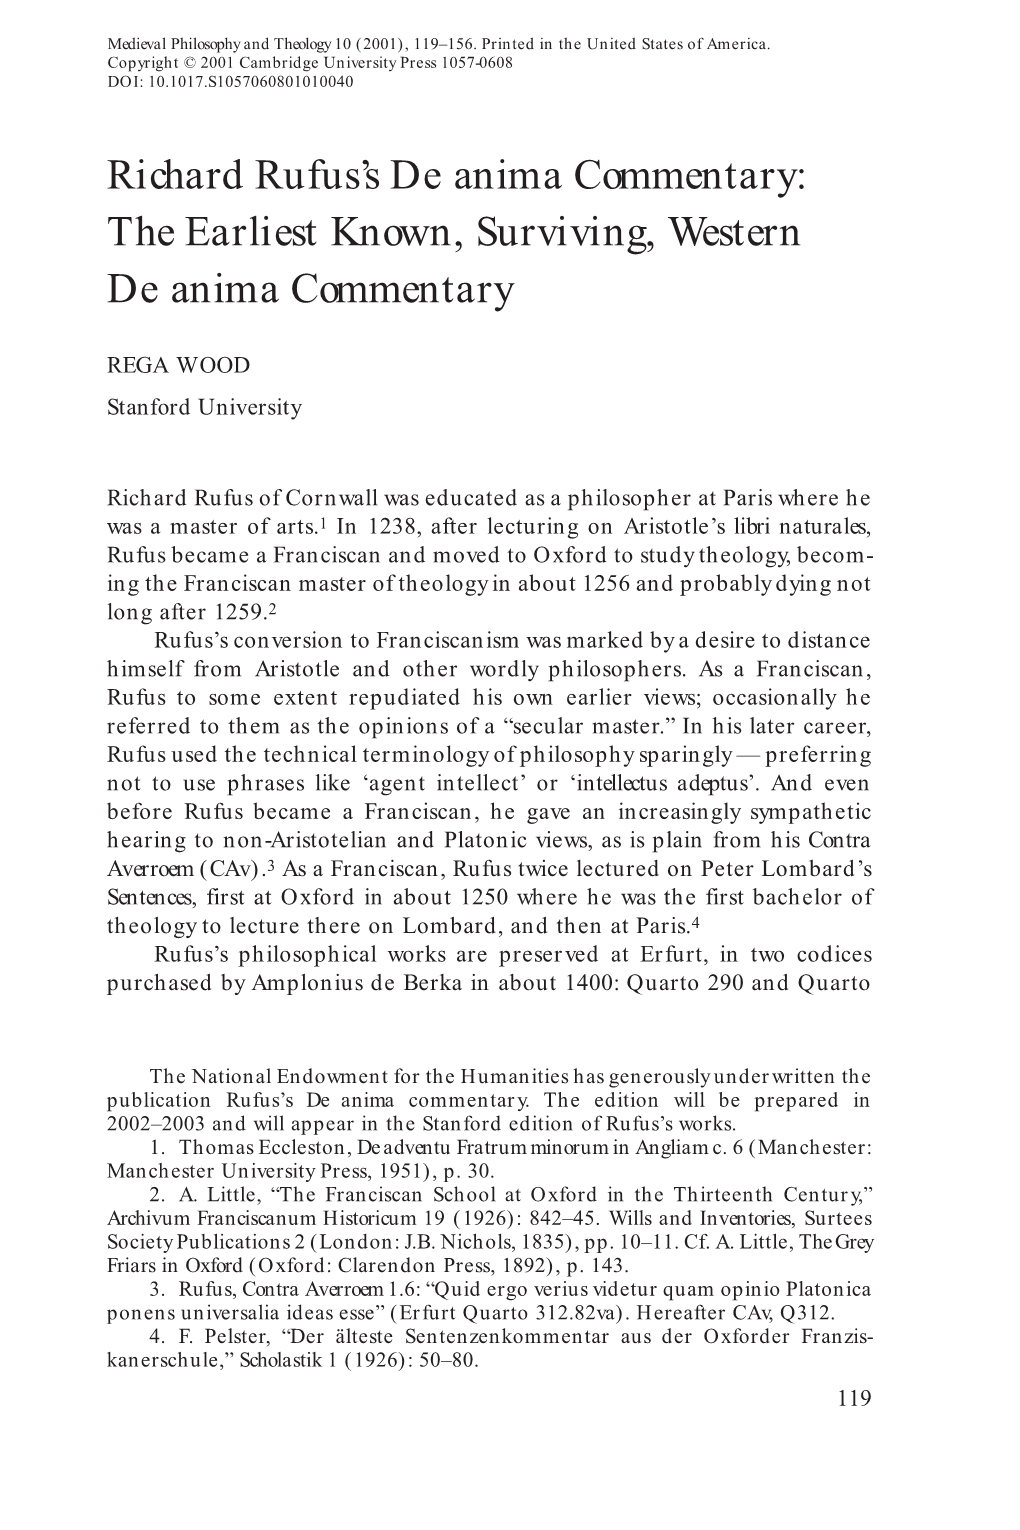 The Earliest Known, Surviving, Western De Anima Commentary